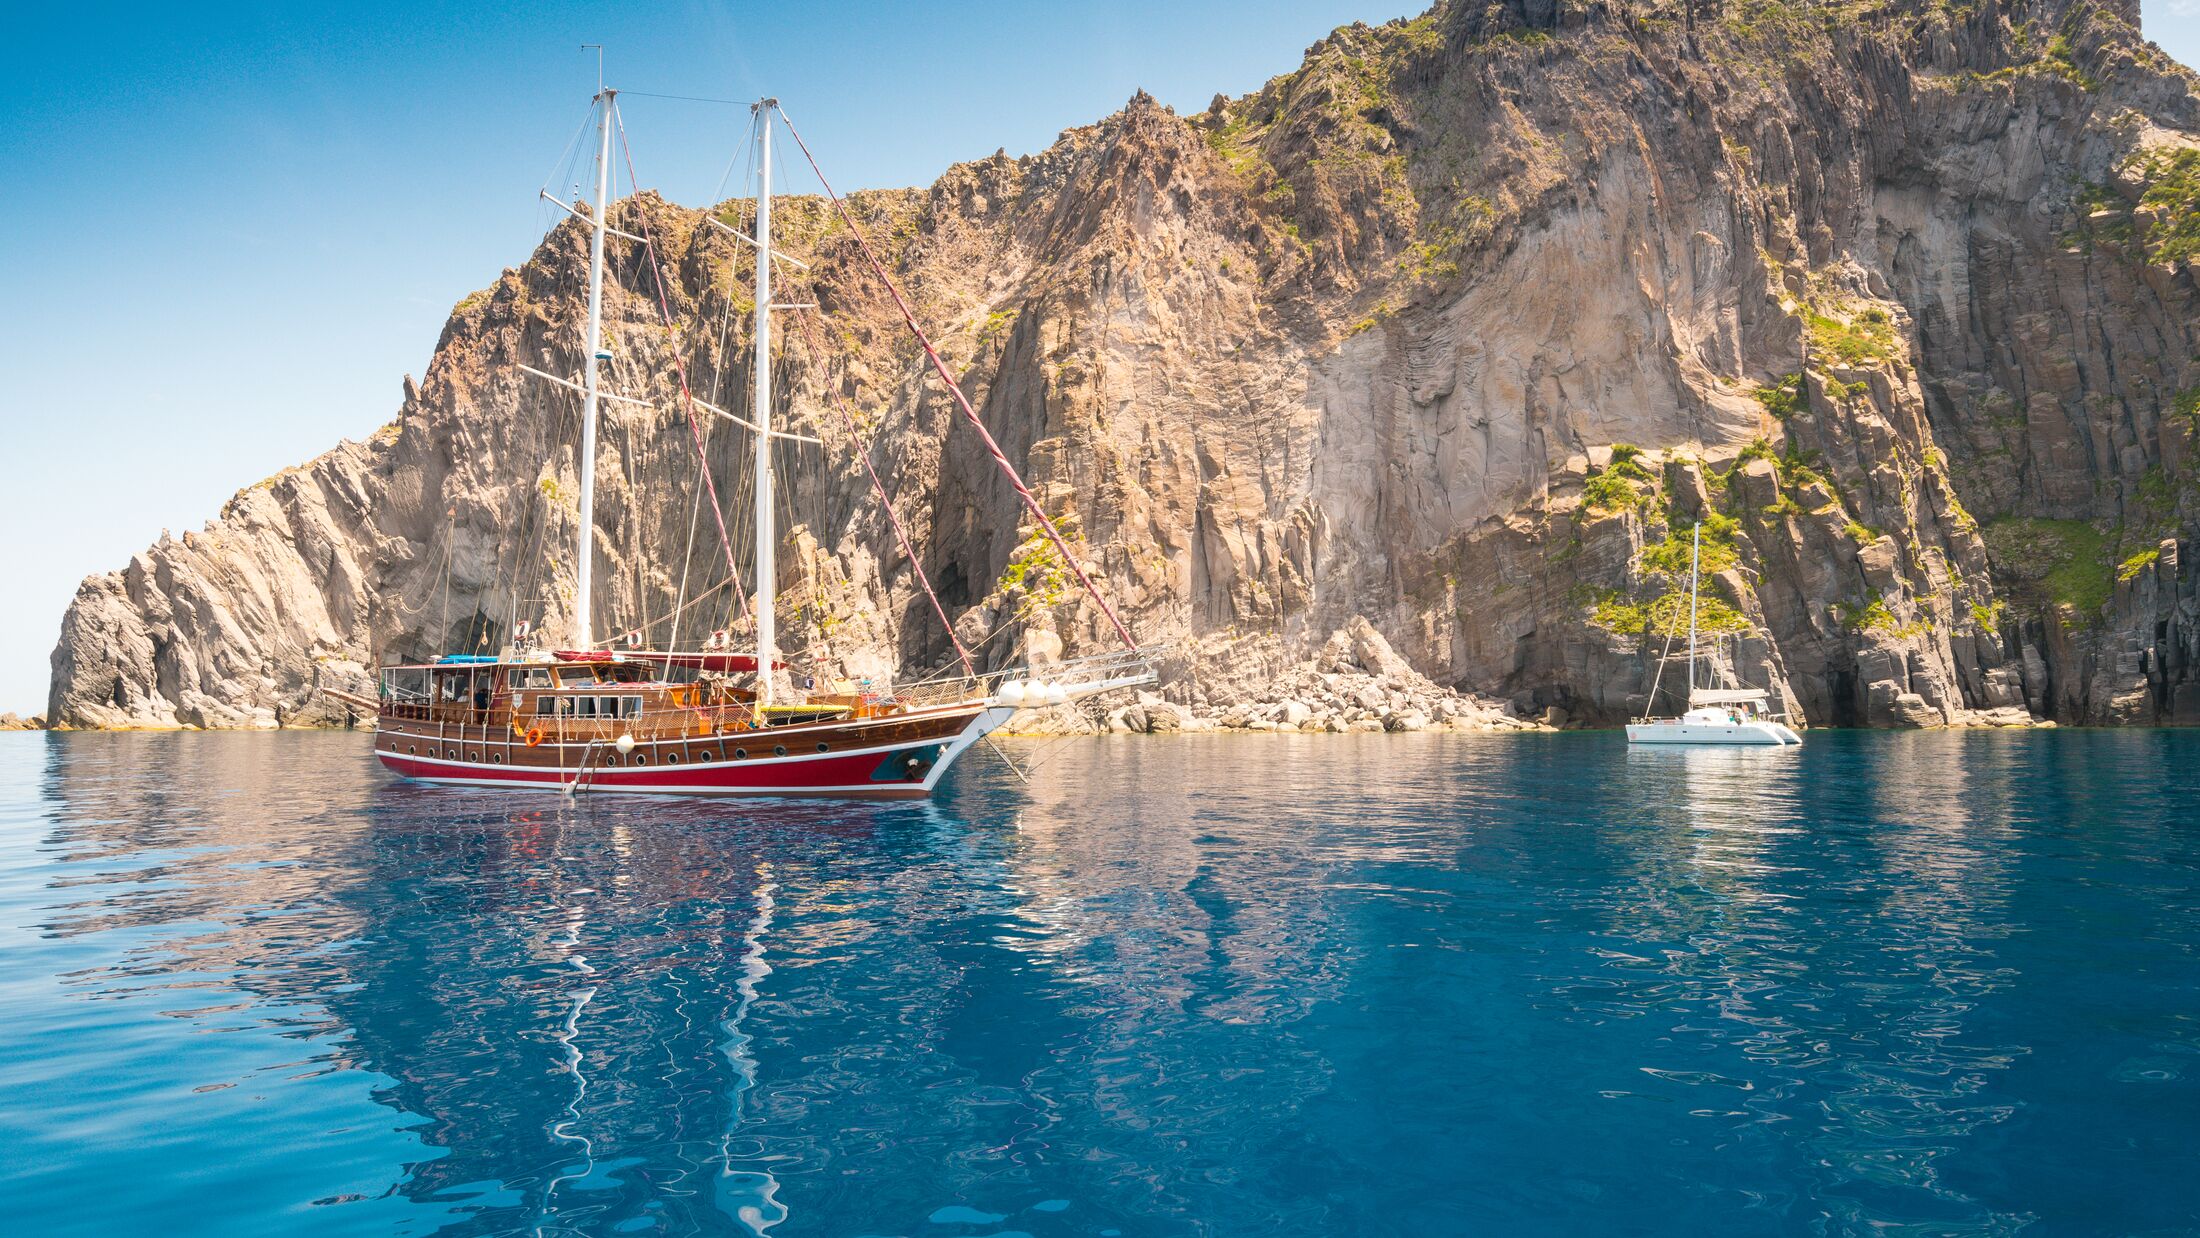 Wooden Classic Sailing yacht anchored in a deserted island in the Eolian Islands of the Mediterranean, with impressive cliffs and very blue sky and waters